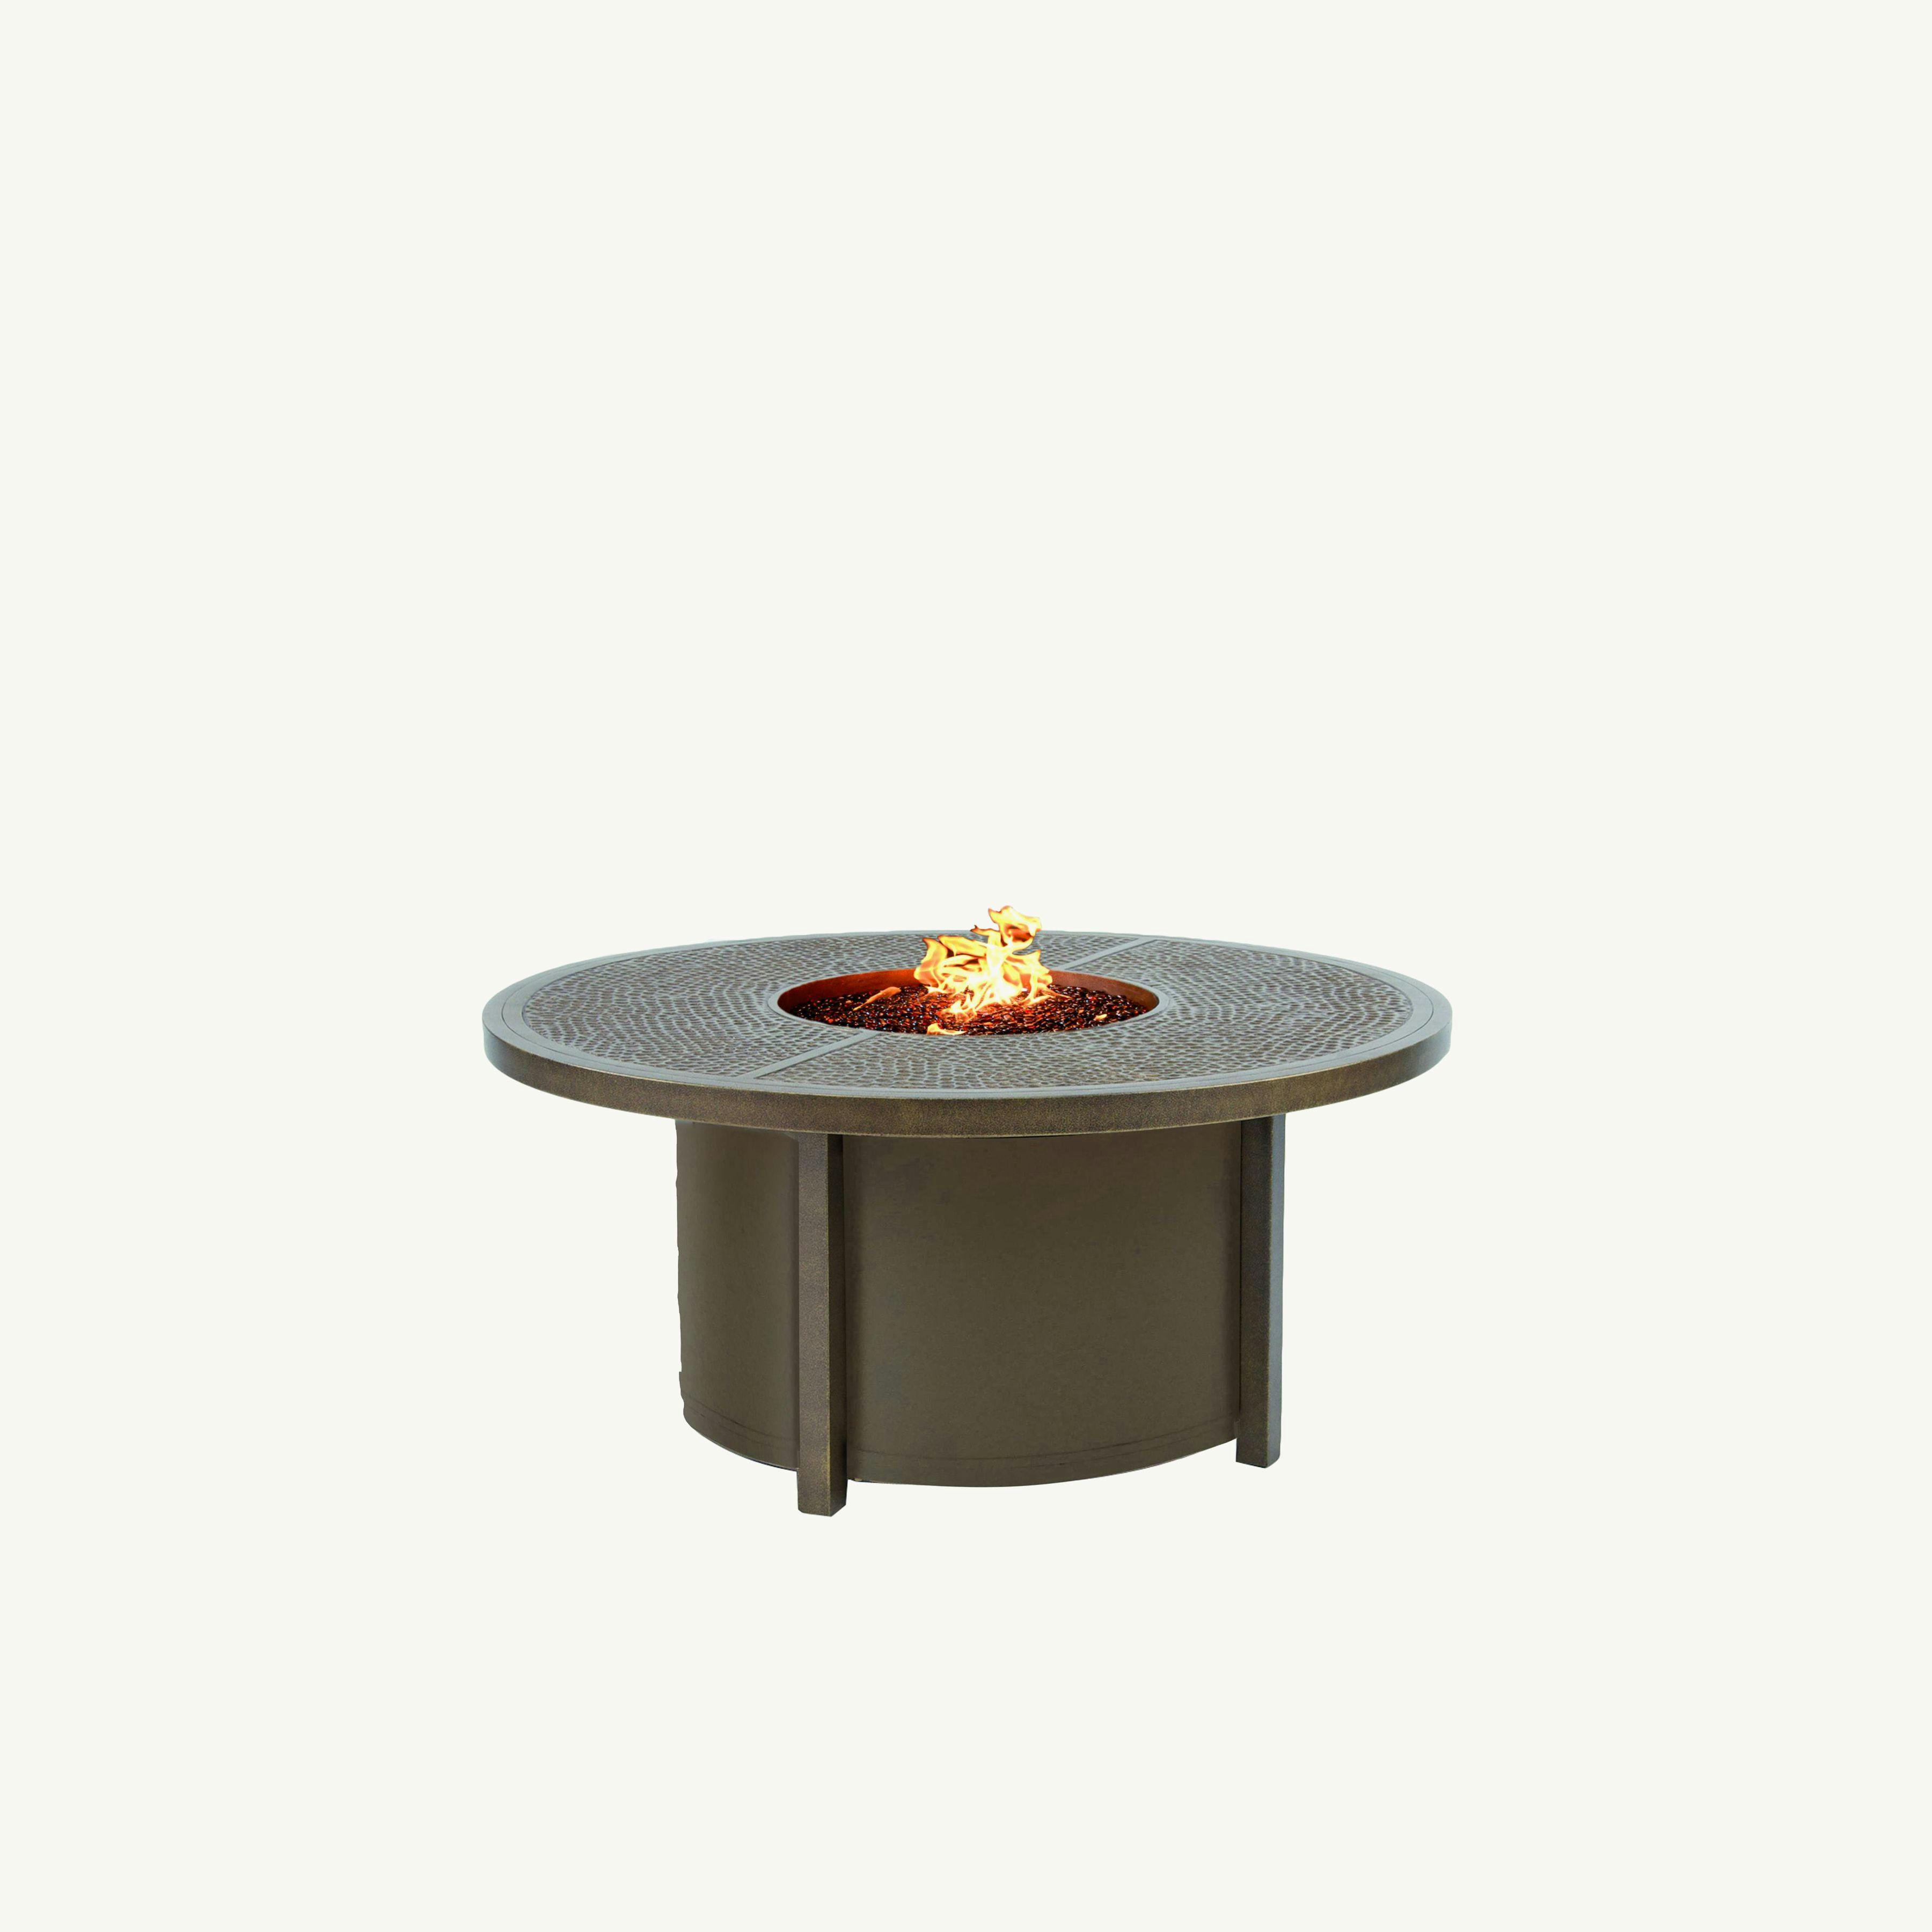 Altra 49" Round Coffee Table With Firepit